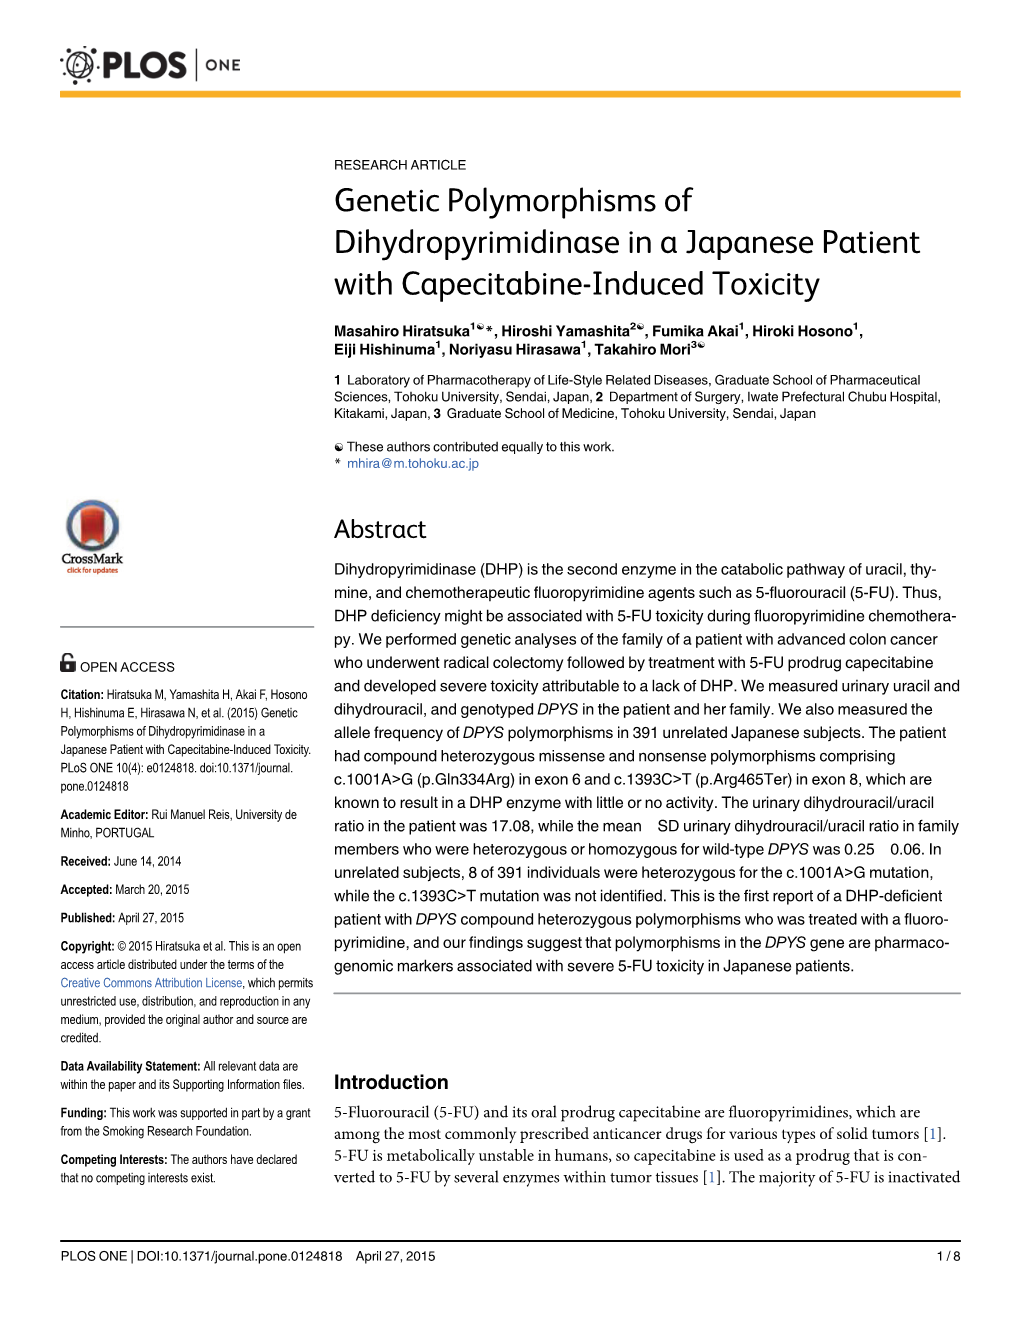 Genetic Polymorphisms of Dihydropyrimidinase in a Japanese Patient with Capecitabine-Induced Toxicity